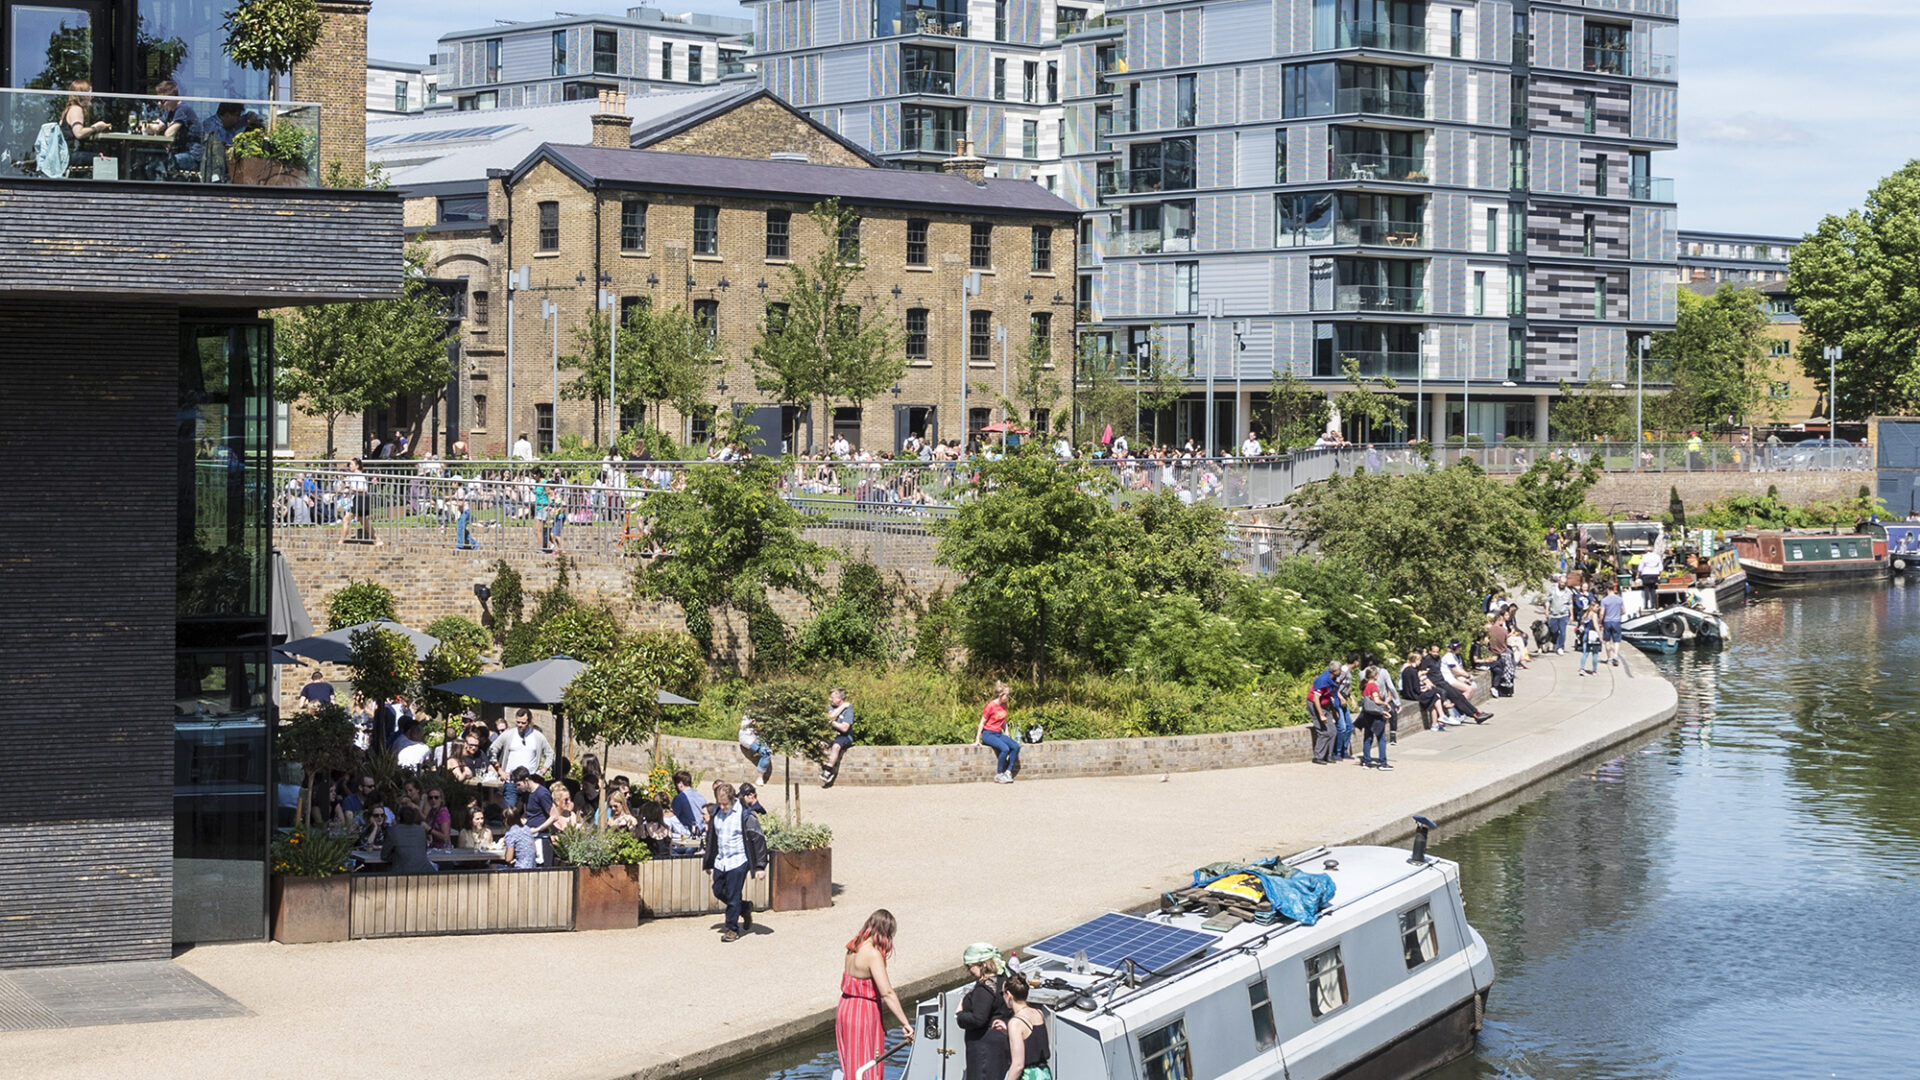 The Lighterman terrace, Regents Canal and Wharf Road Gardens at King's Cross